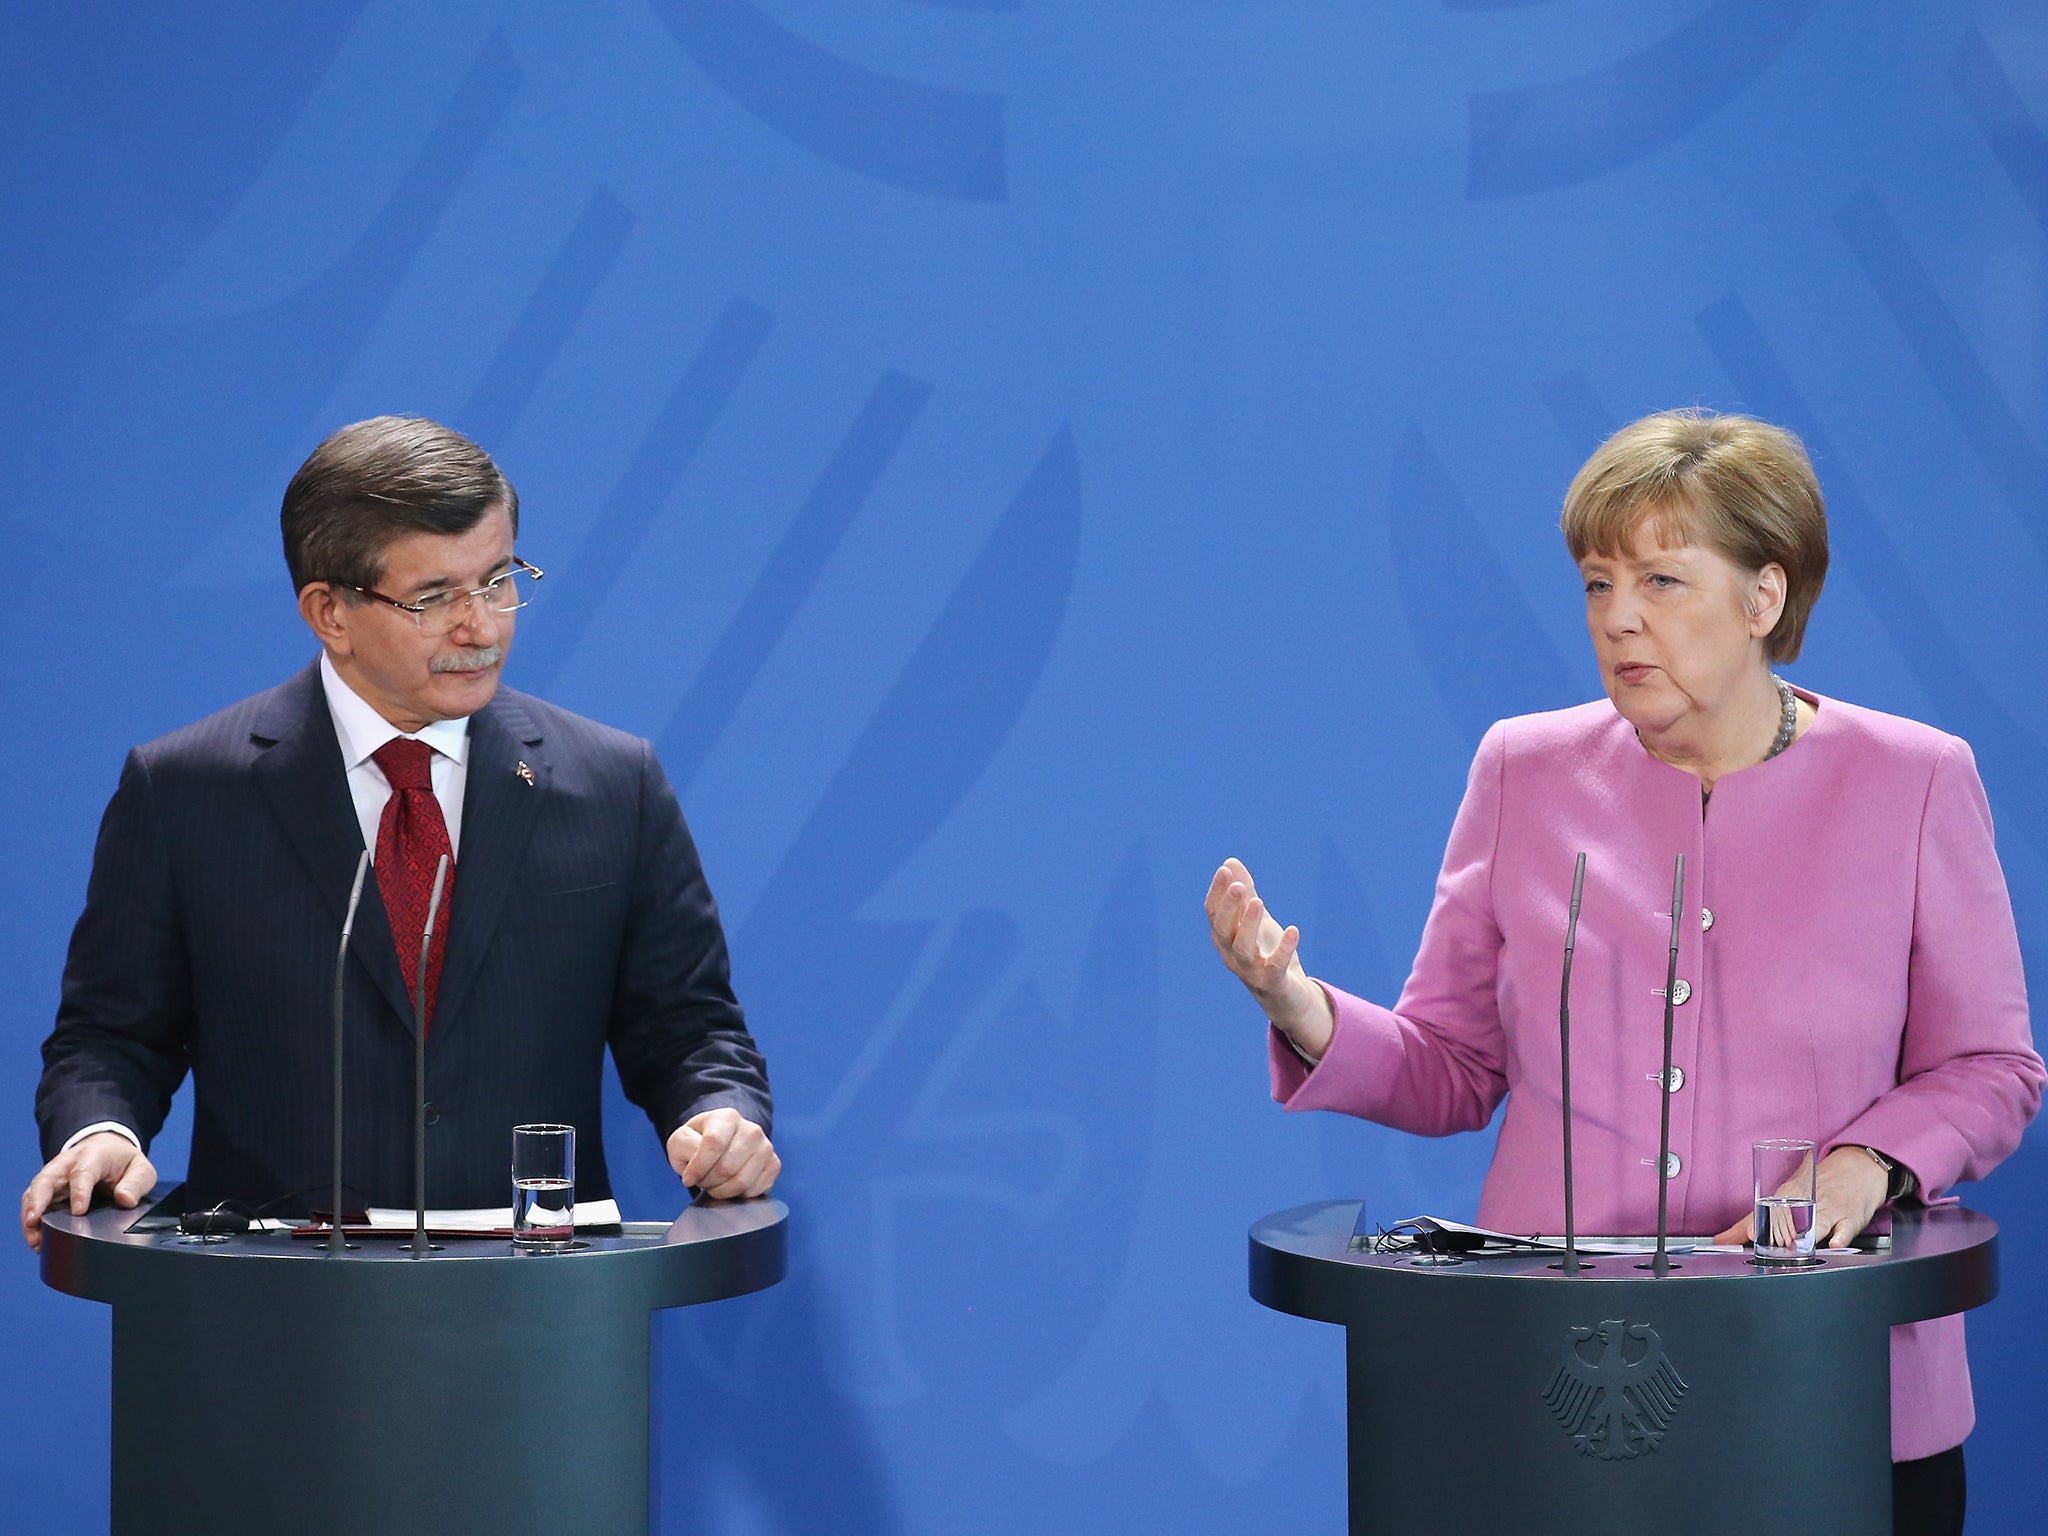 Turkish Prime Minister Ahmet Davutoglu and German Chancellor Angela Merkel speak to the media following German-Turkish government consultations. The two governments are meeting amidst Europe's need for cooperation from Turkey in stemming the flow of refugees and migrants seeking asylum in Europe.